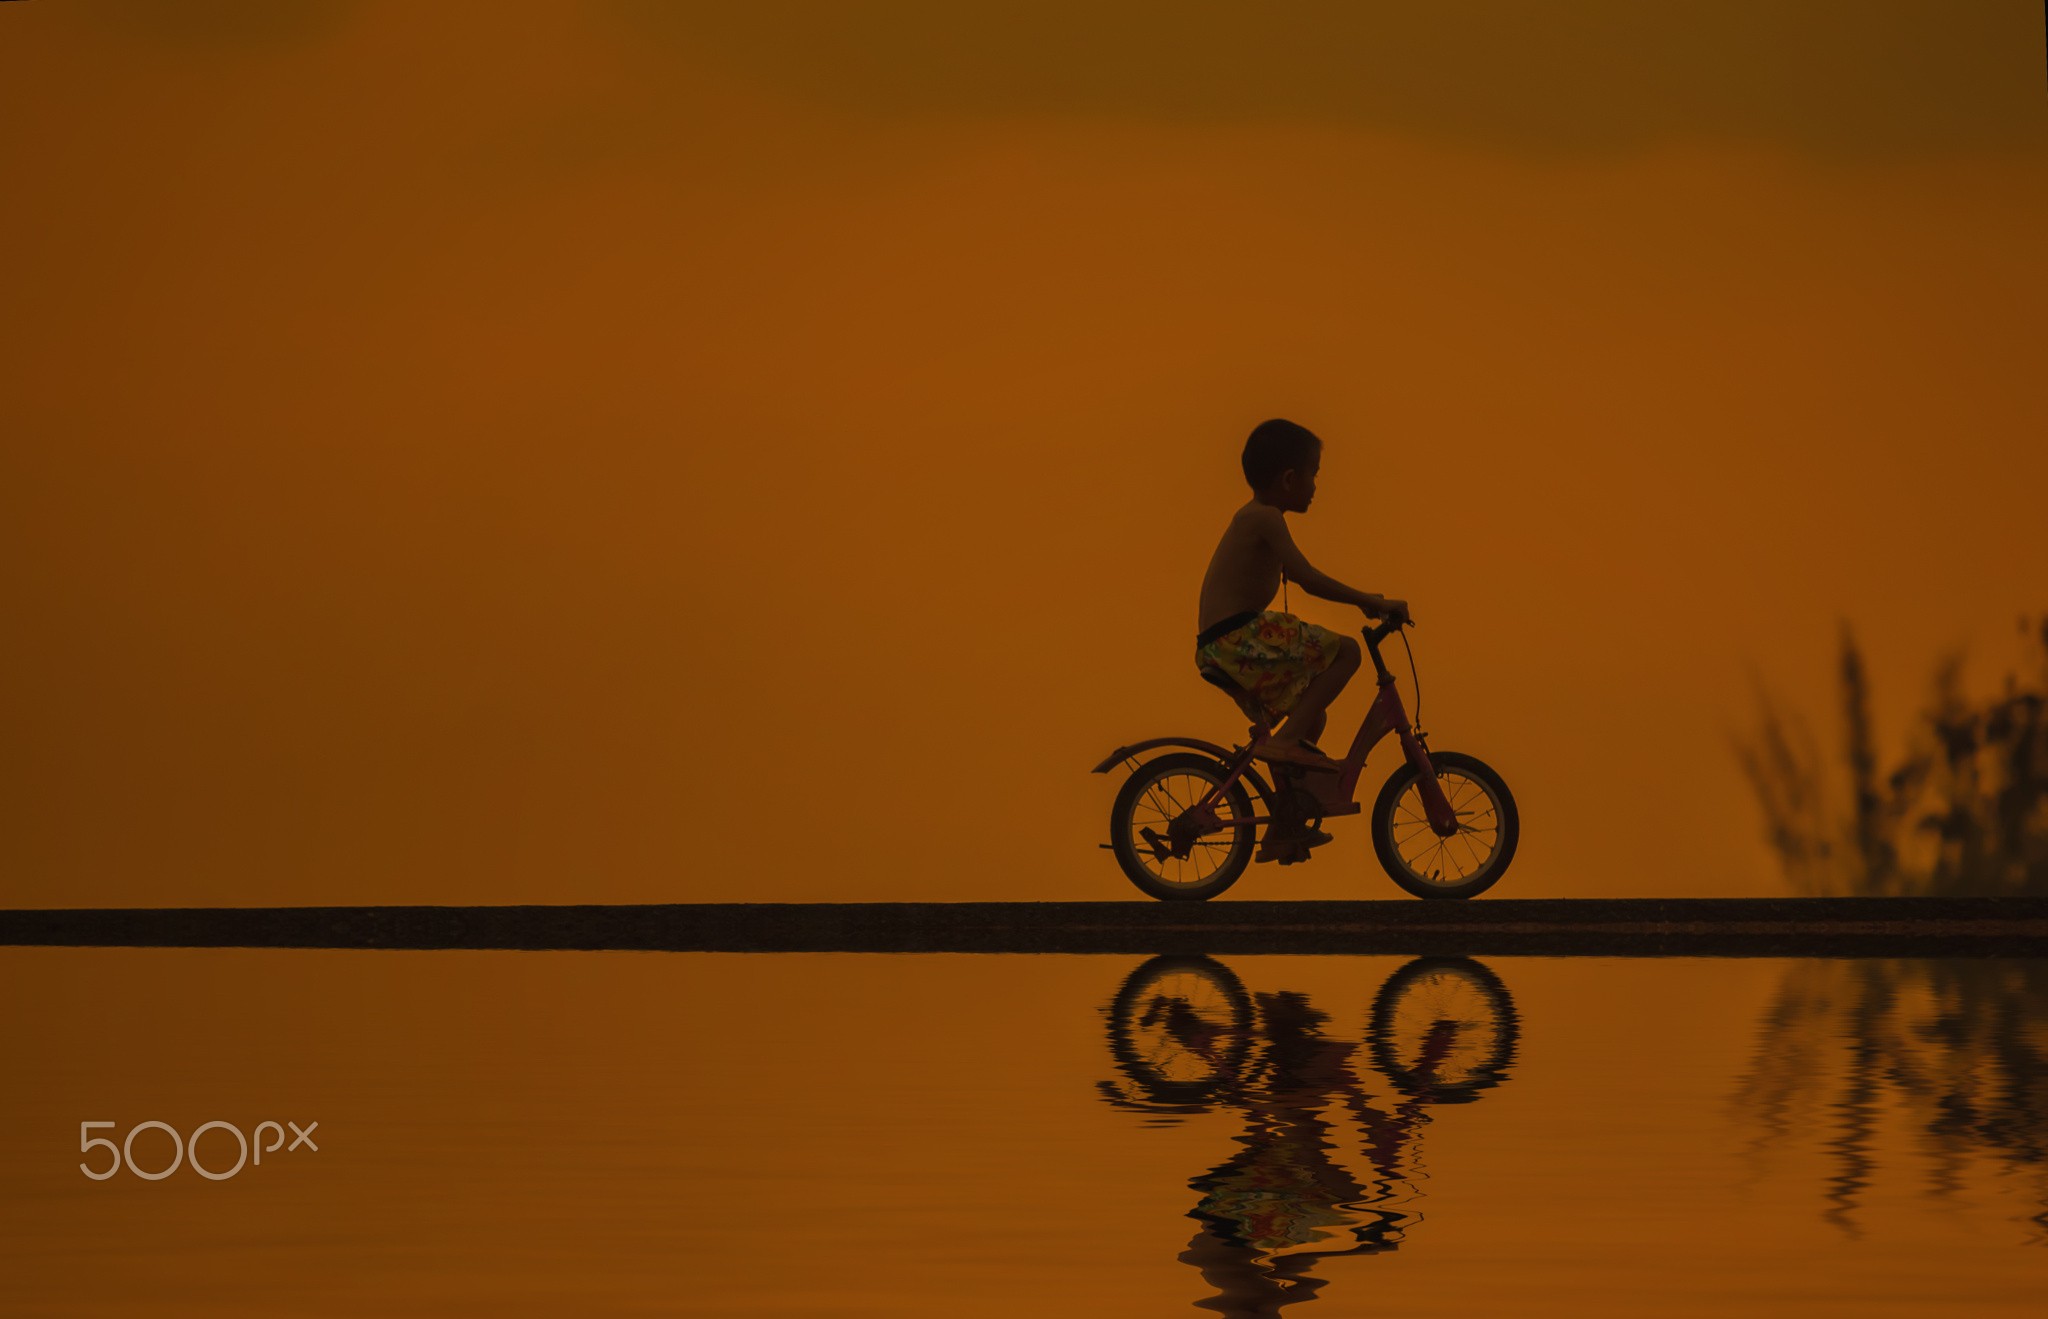 General 2048x1319 children 500px bicycle reflection